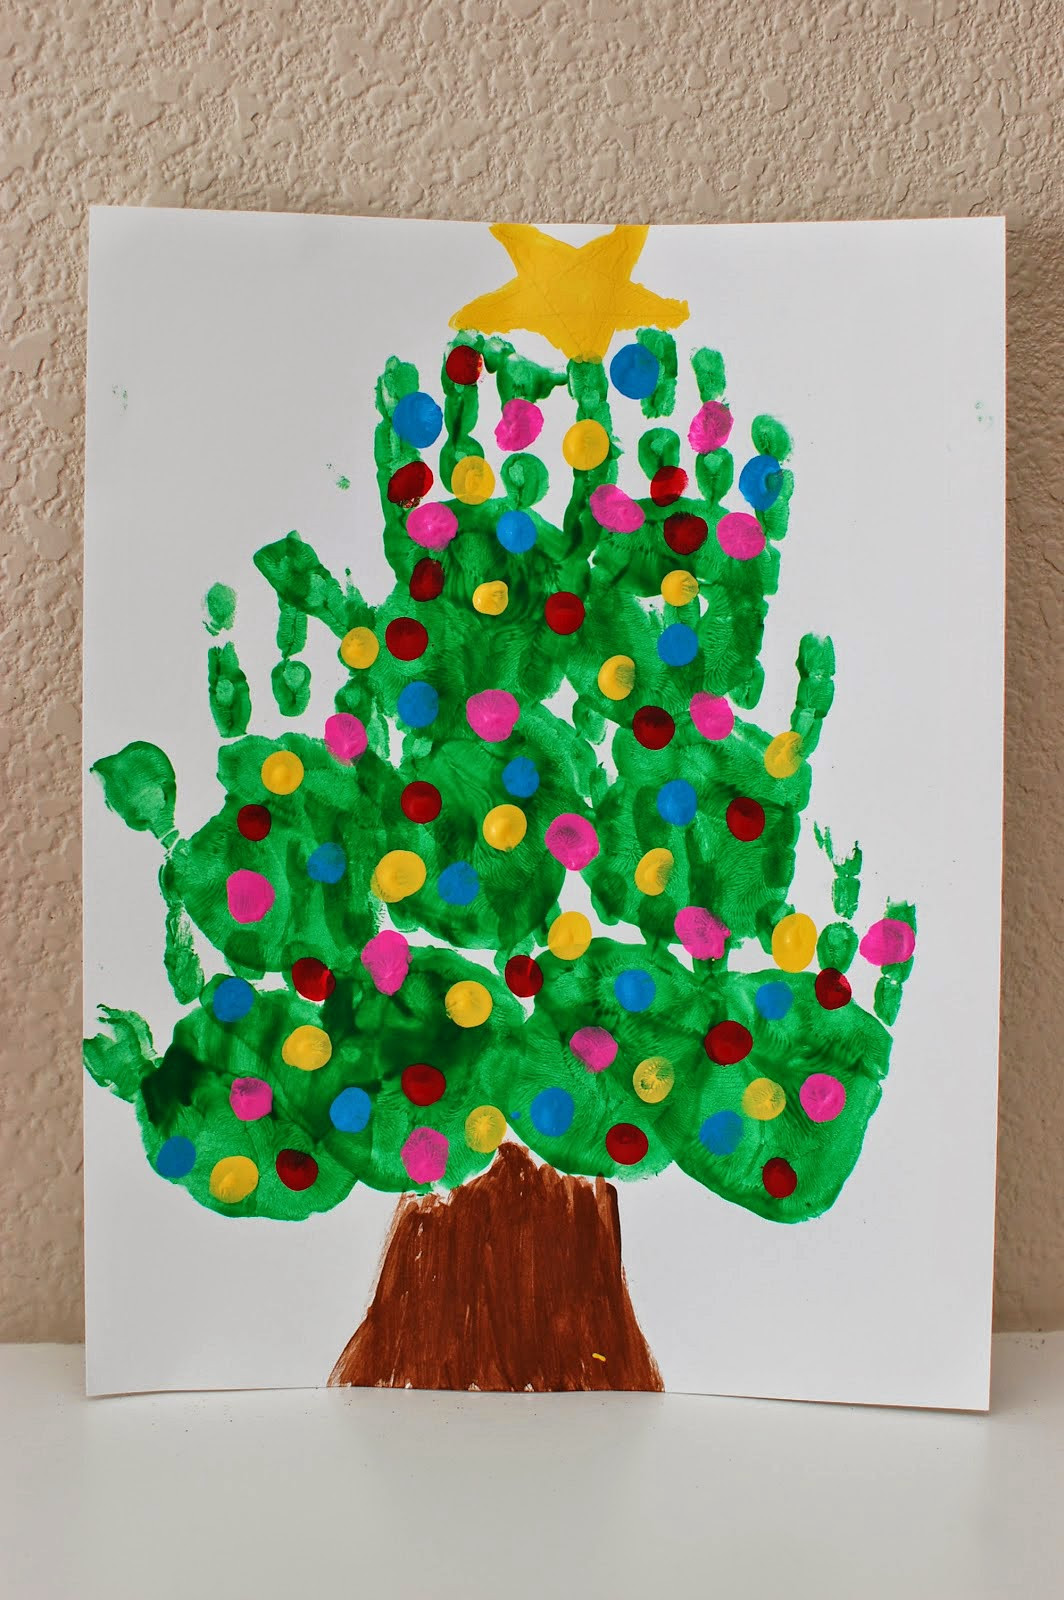 Christmas Arts And Craft Ideas For Toddlers
 20 of the Cutest Christmas Handprint Crafts for Kids